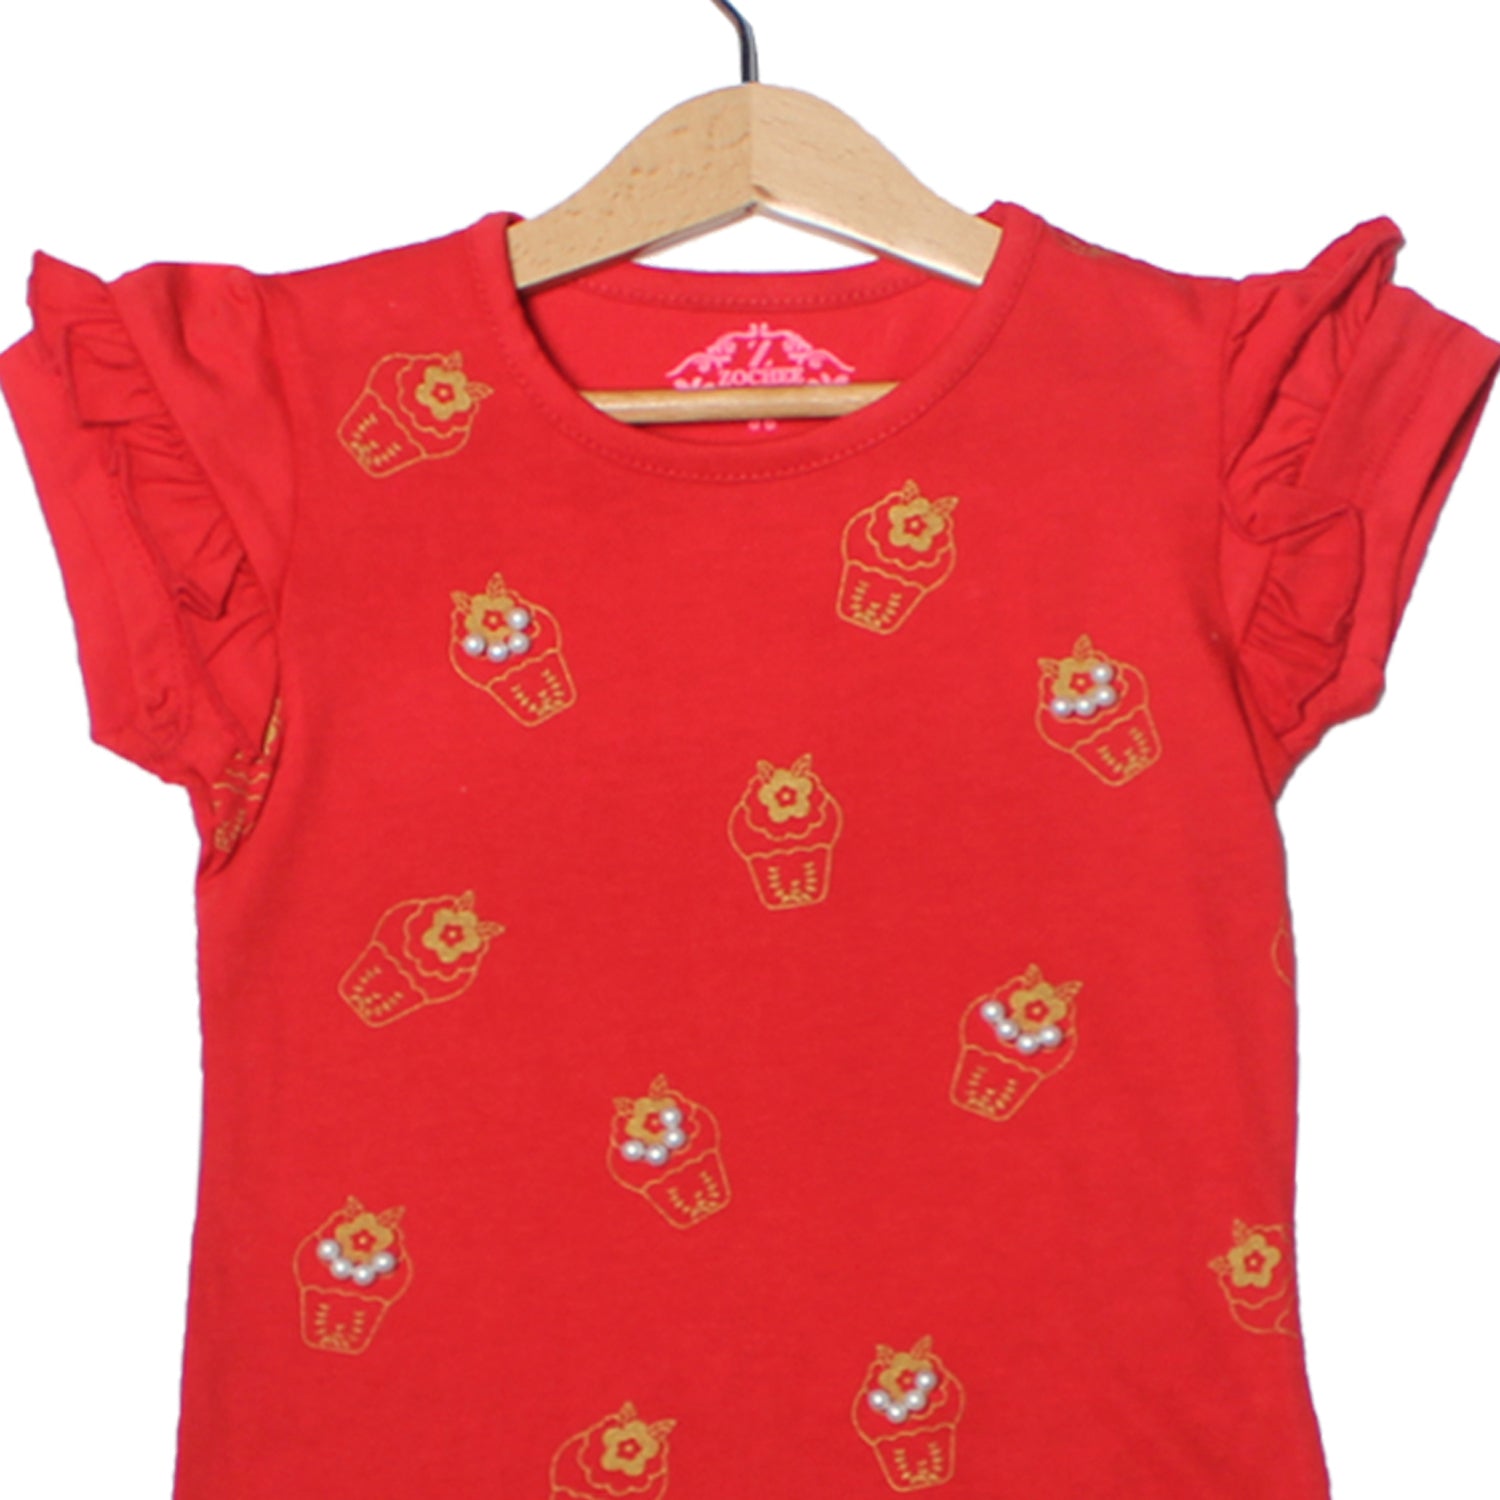 NEW RED MUFFINS PRINTED T-SHIRT TOP FOR GIRLS